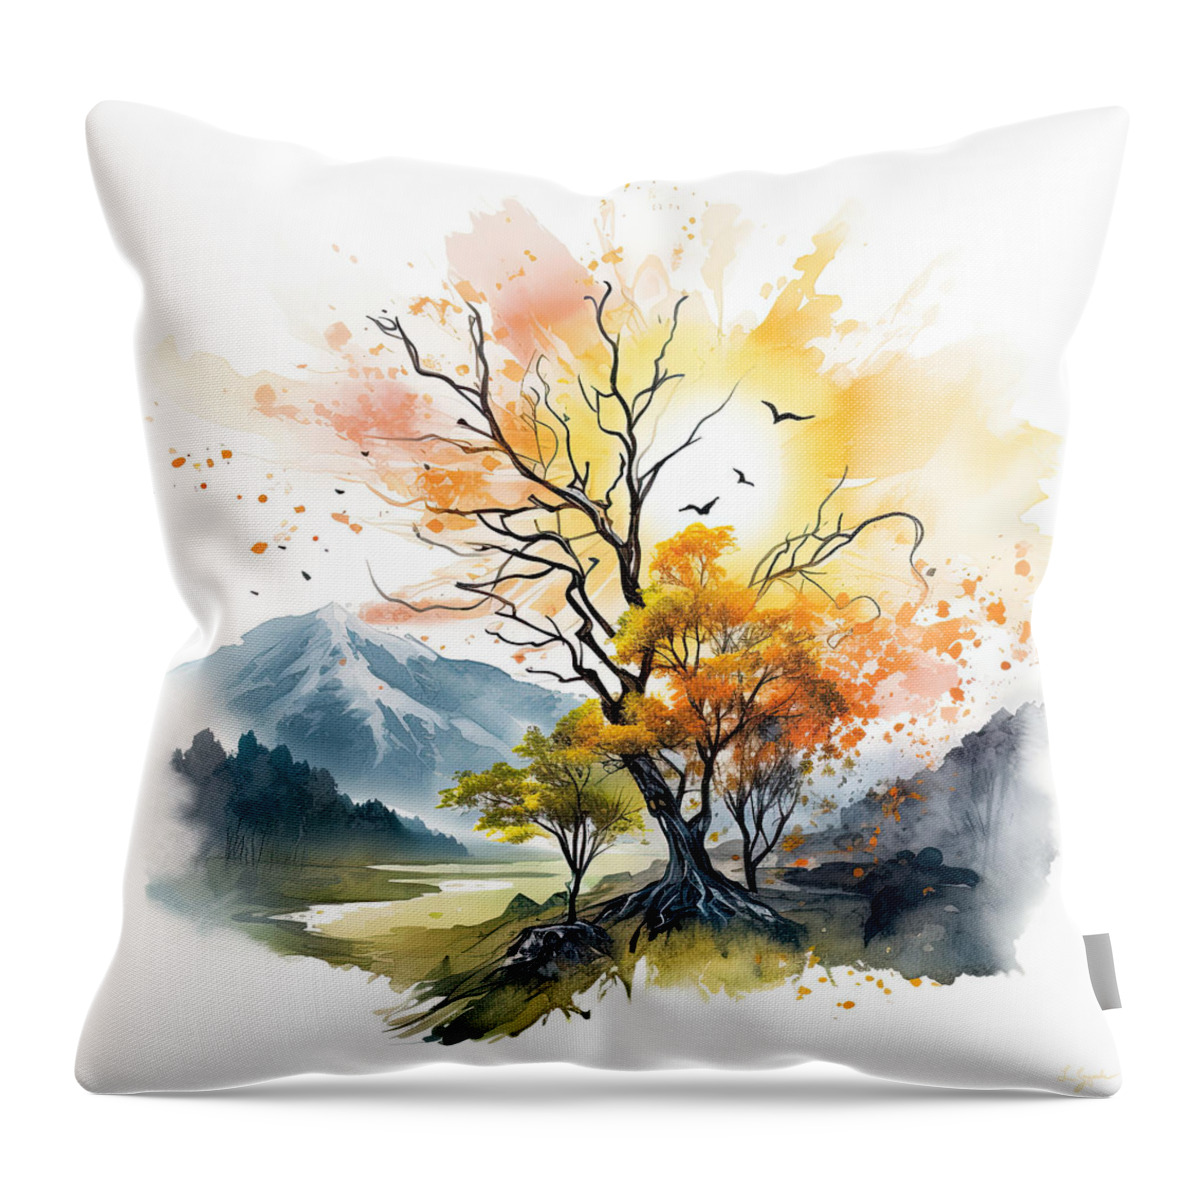 Four Seasons Throw Pillow featuring the painting Autumn Rhapsody - Four Seasons Landscapes by Lourry Legarde